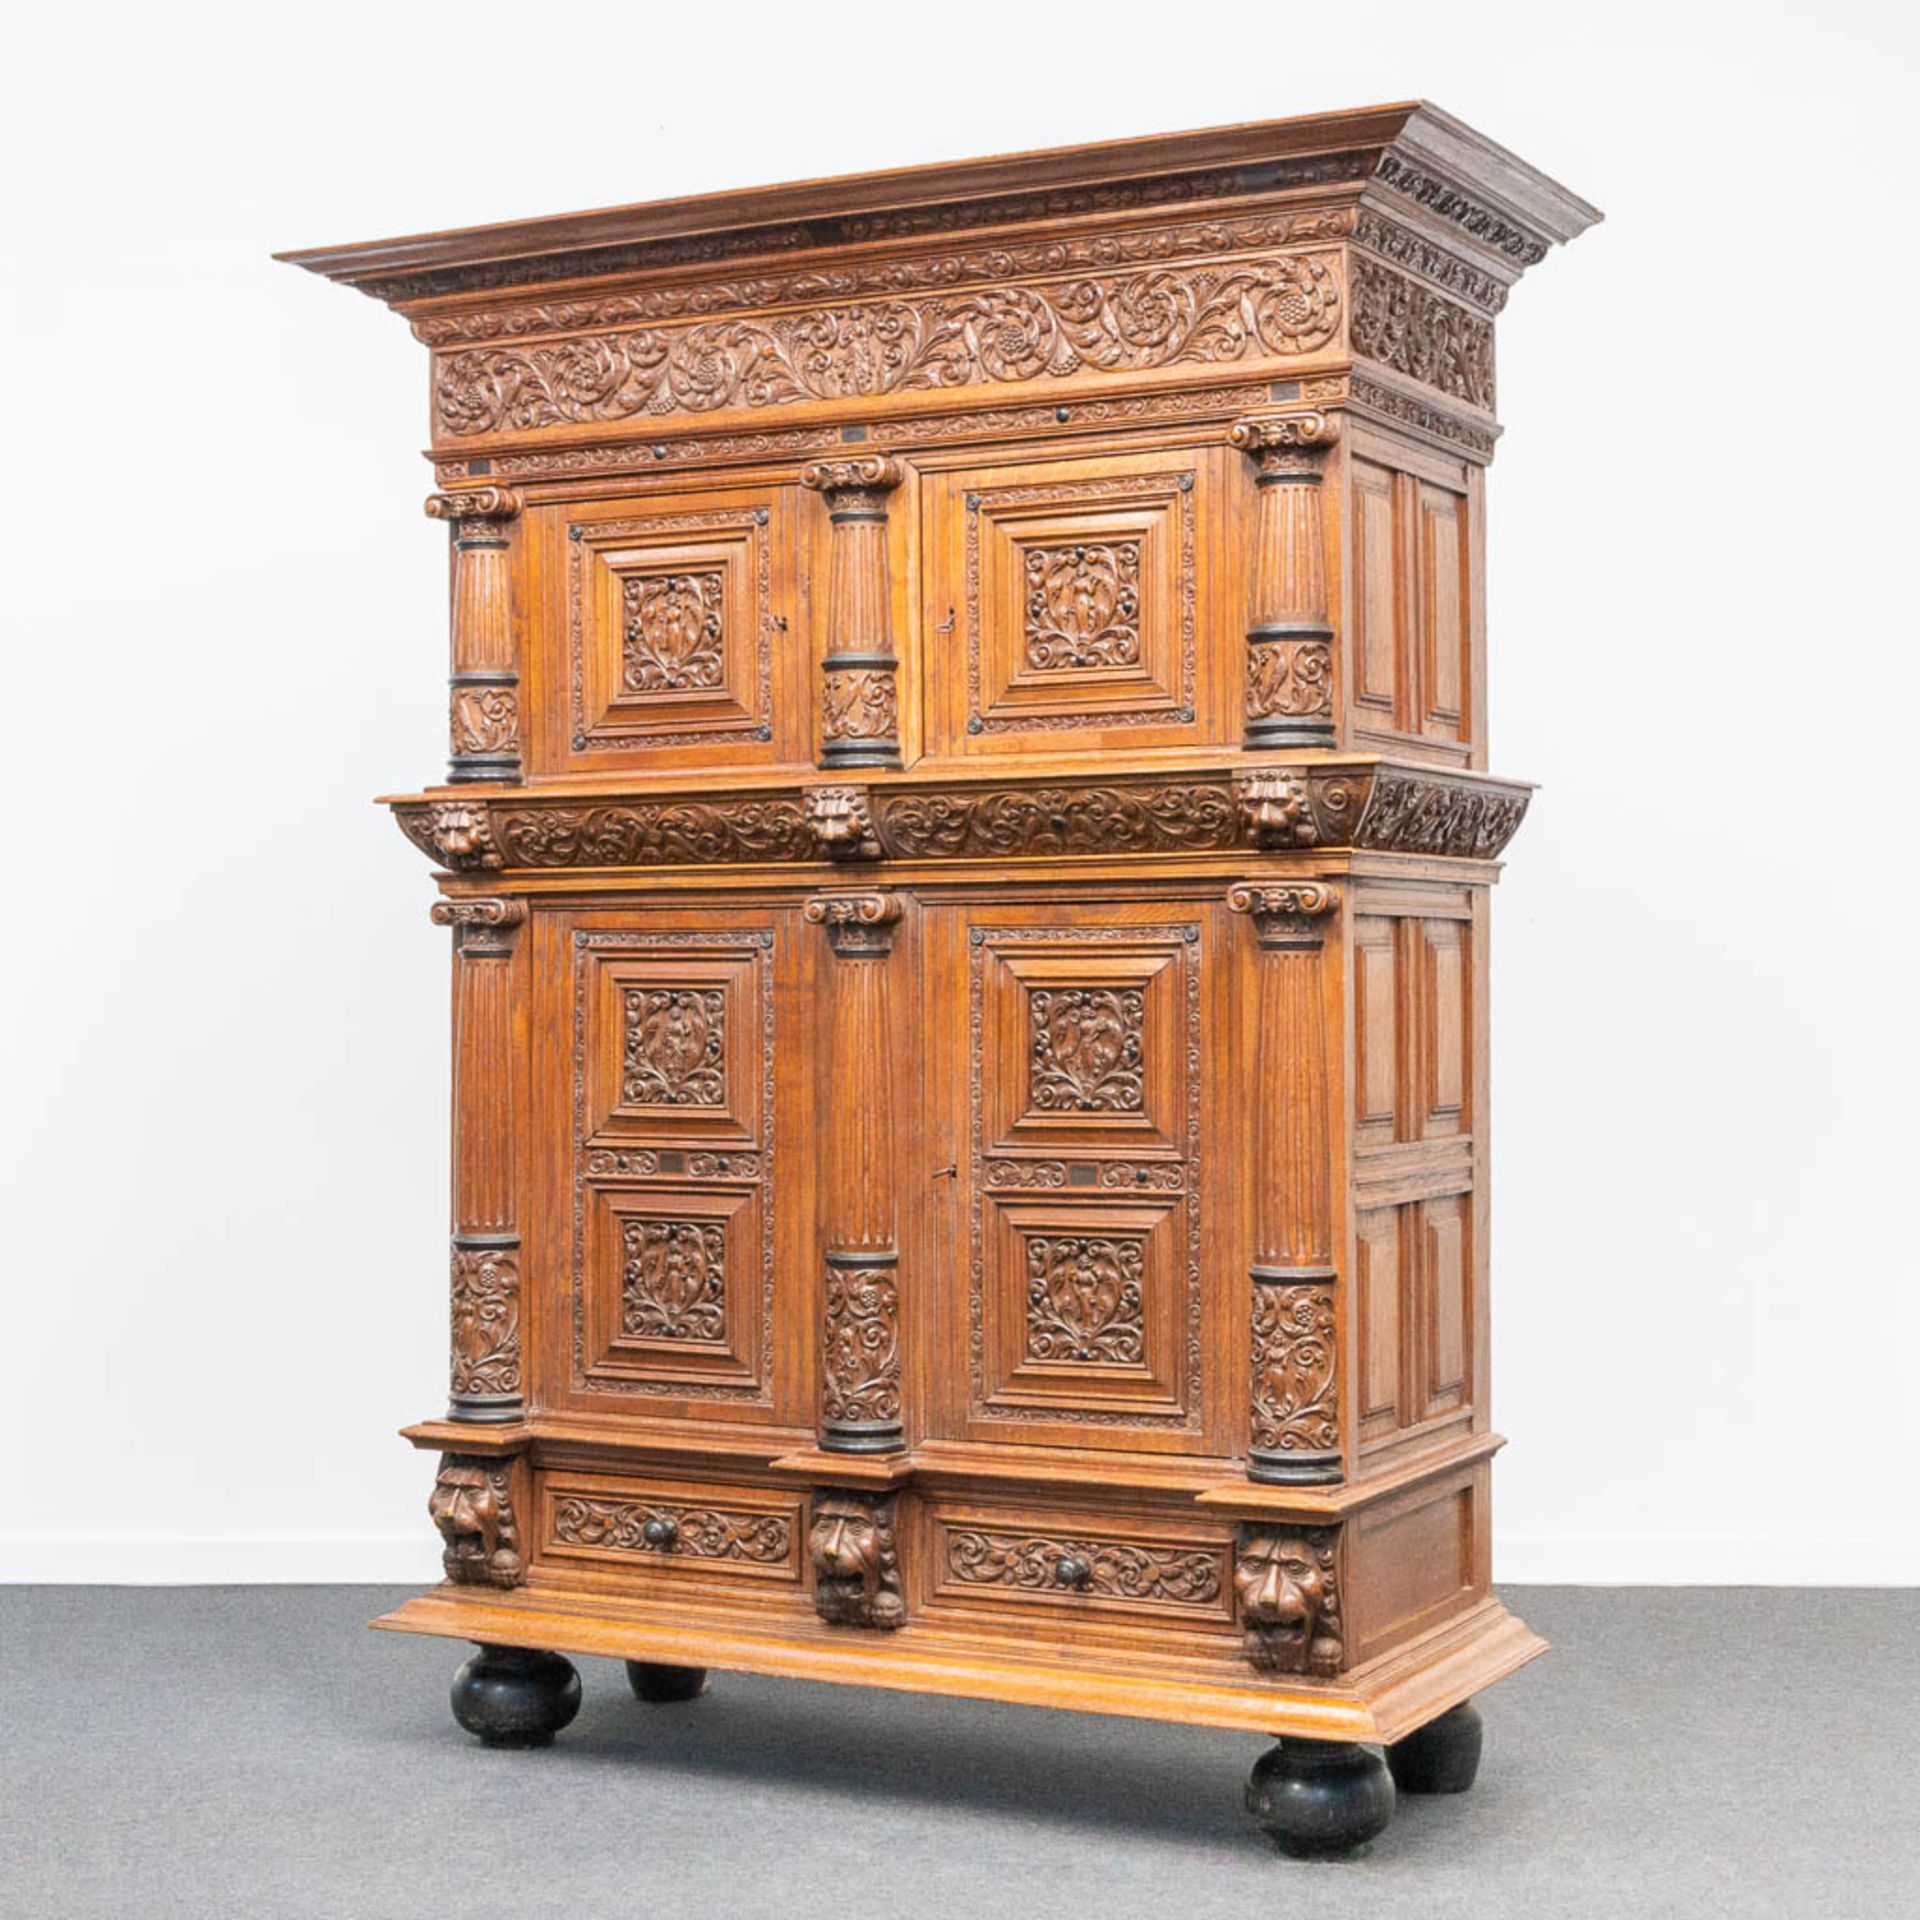 A cabinet, made in Flemish renaissance style, oak with fine sculptures, 19th century. - Image 9 of 27